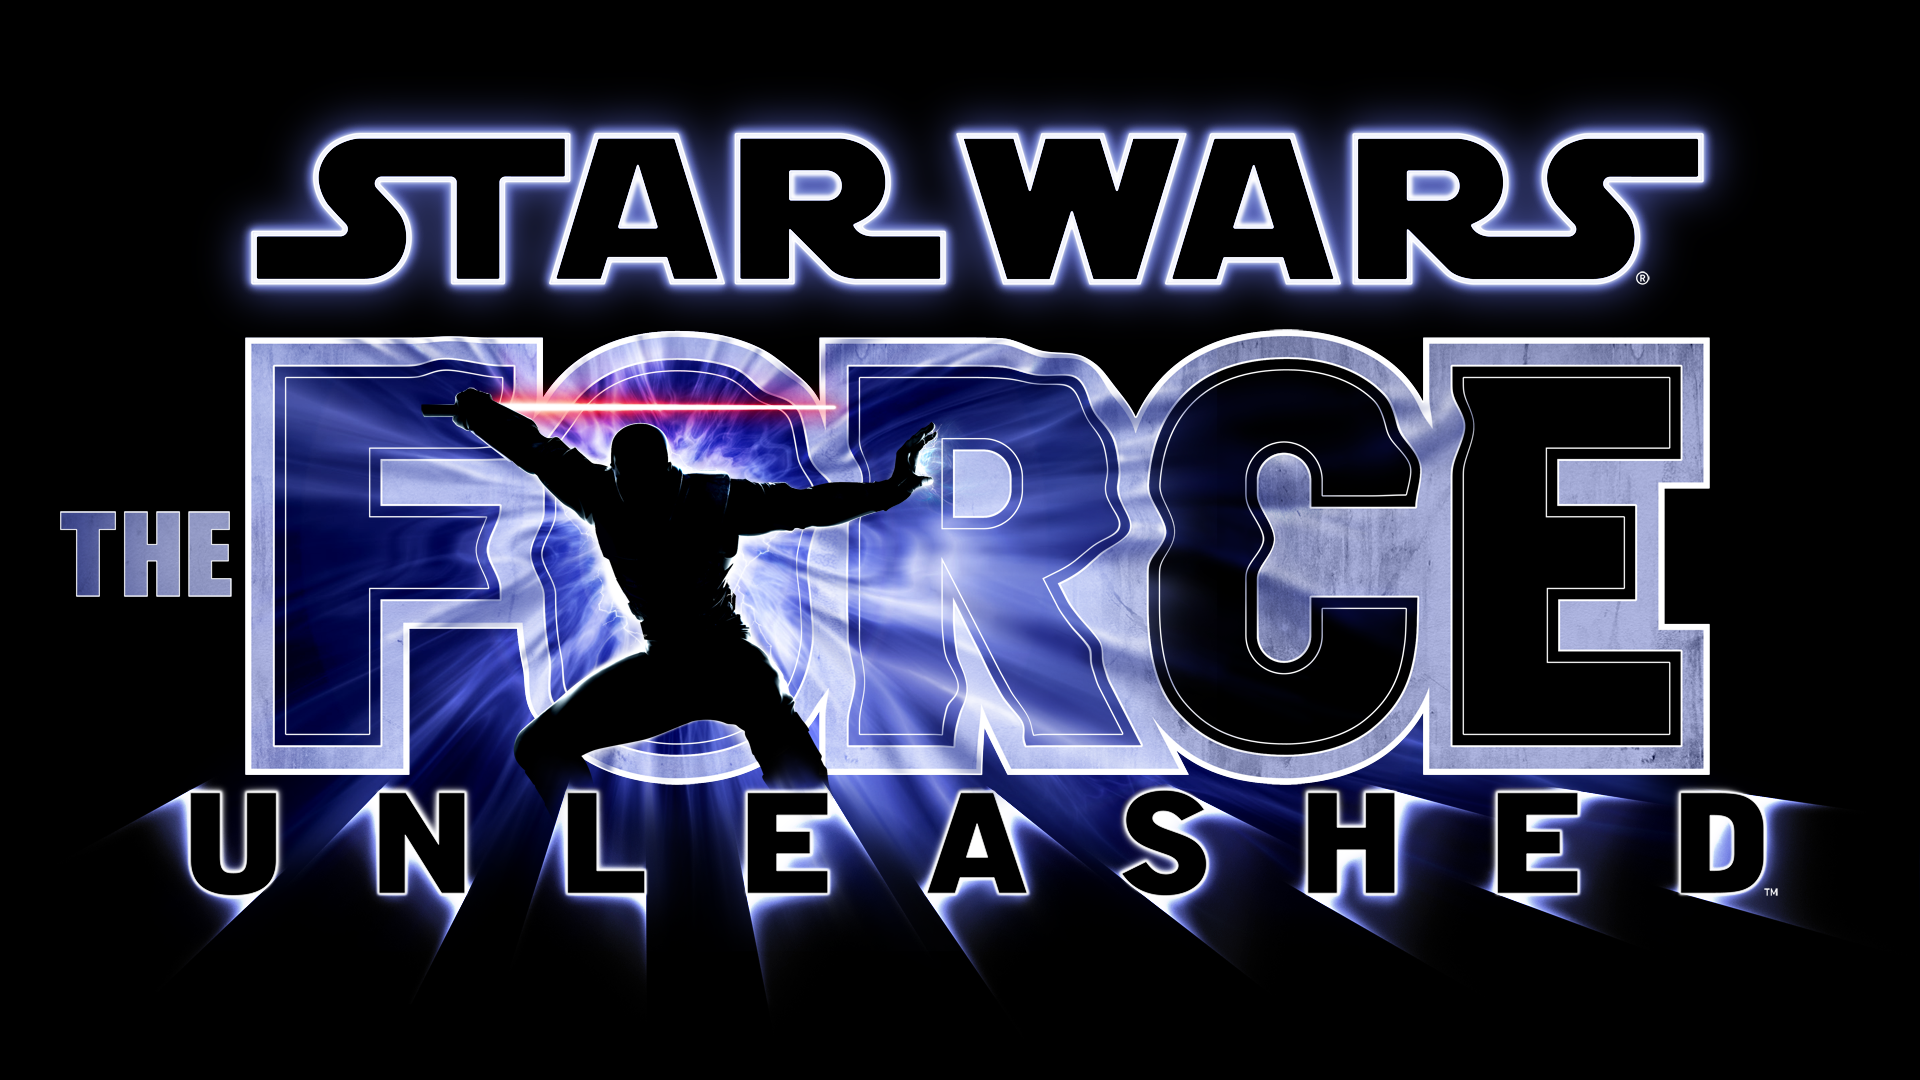 ps2 star wars the force unleashed